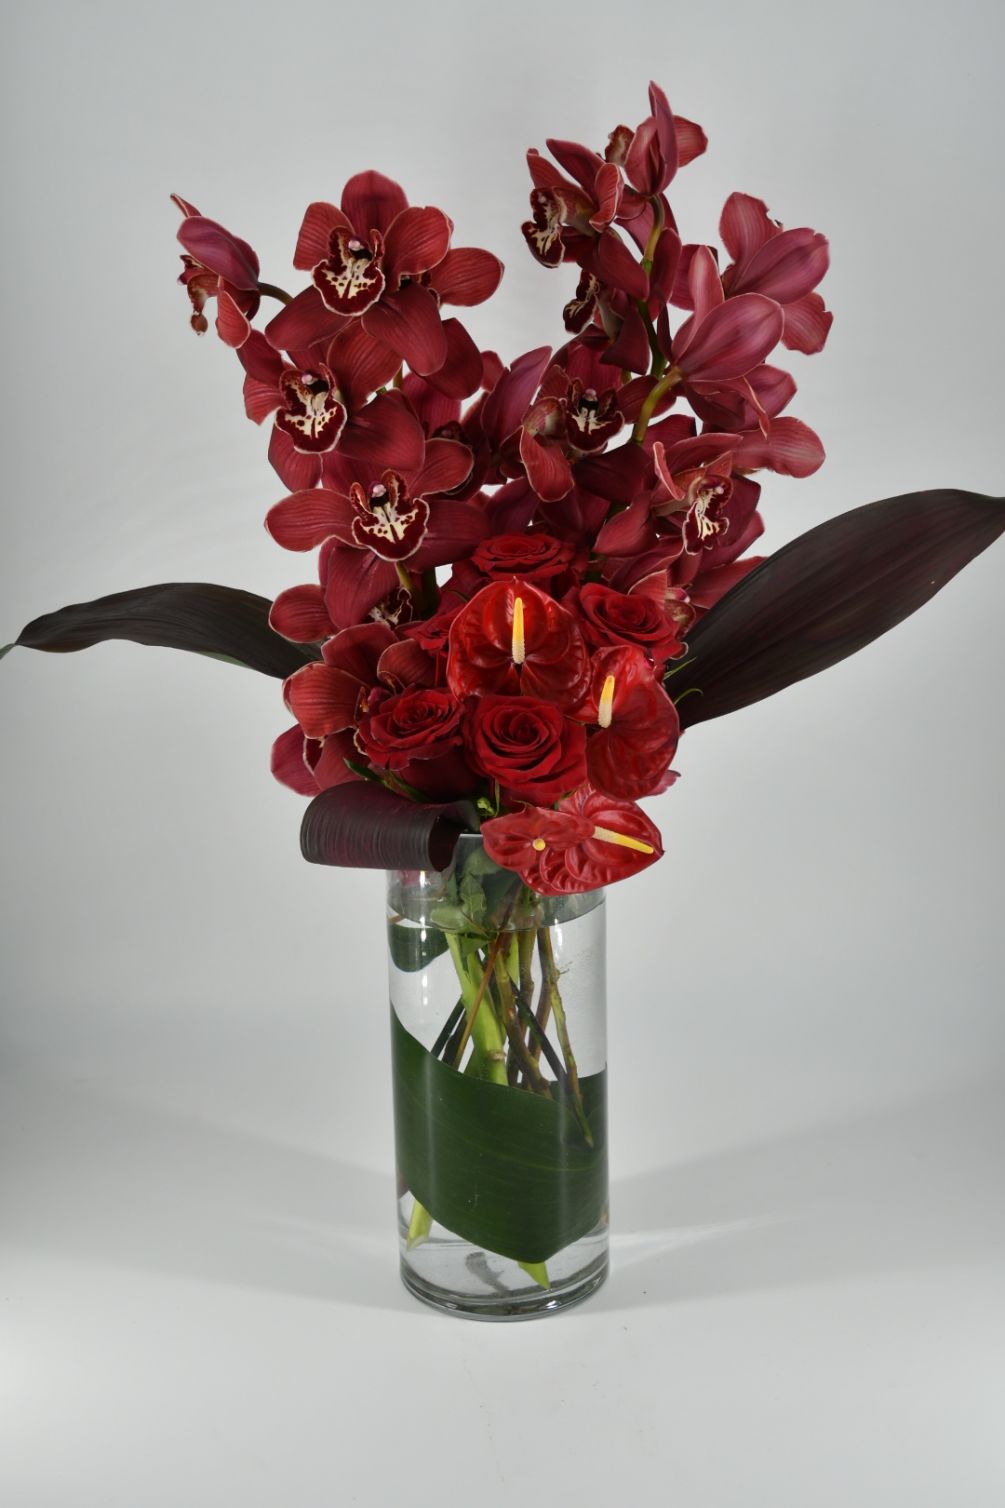 Allow these array of exotic blooms to transport you to the tropical